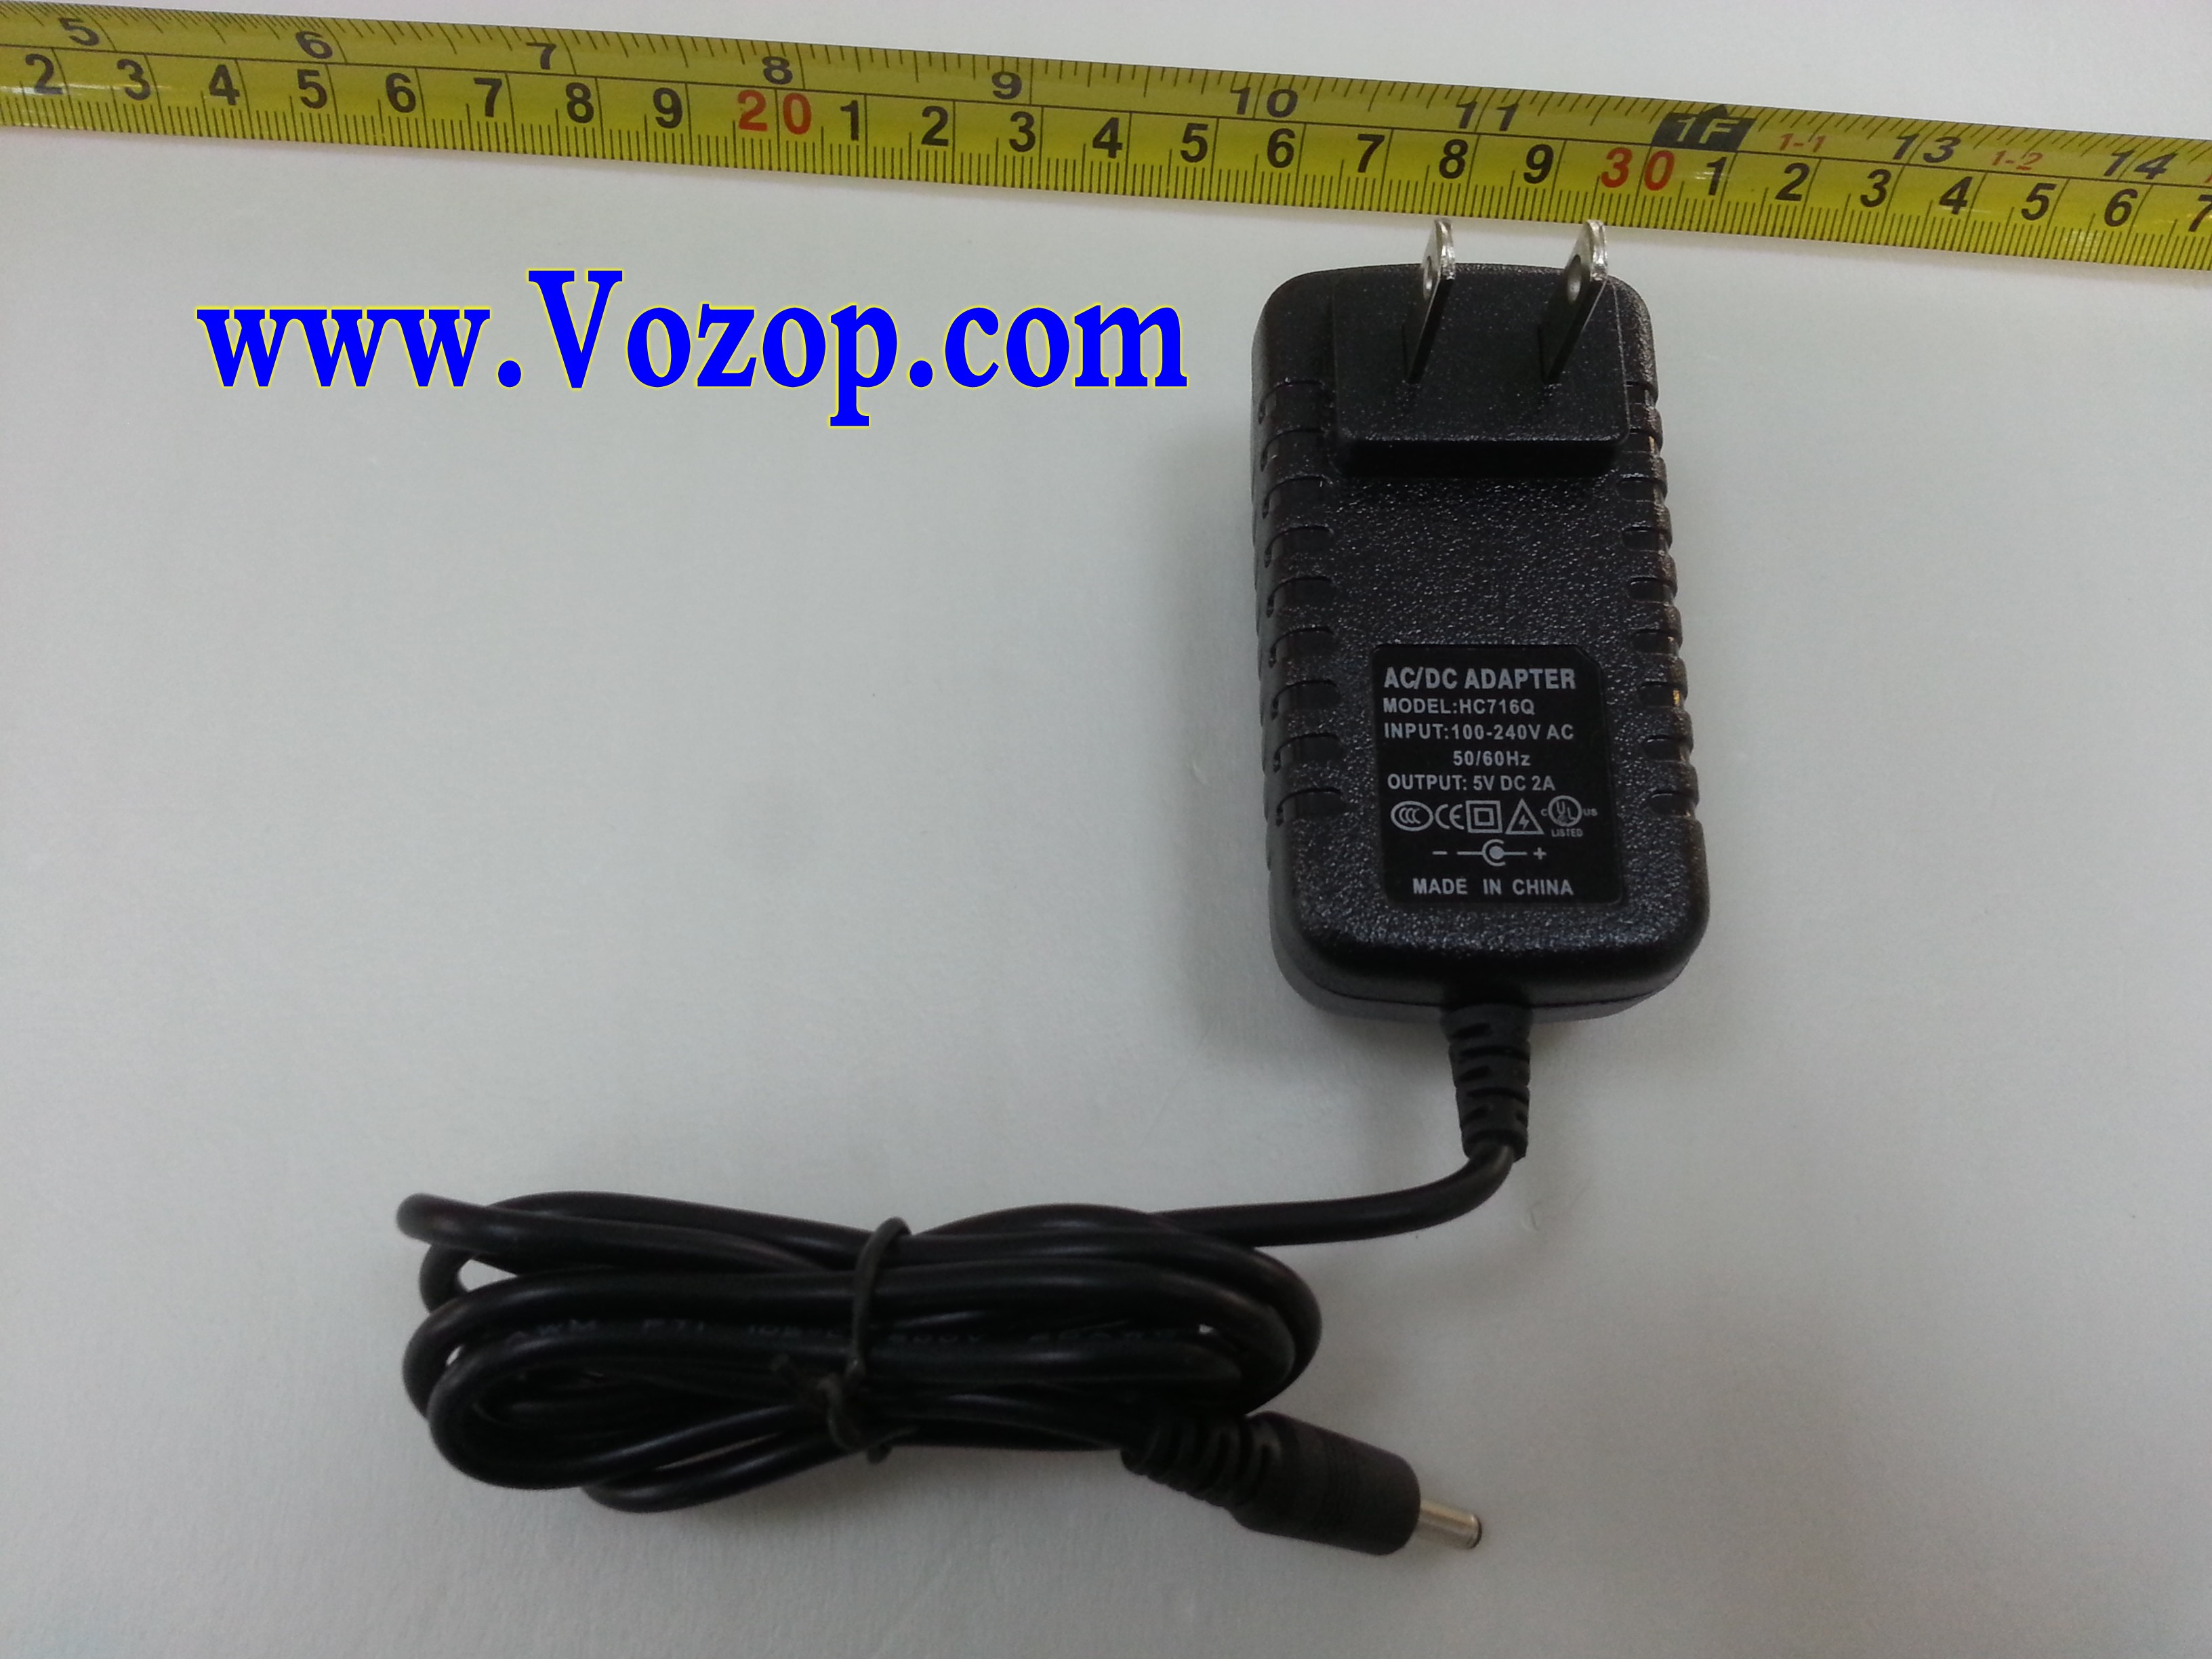 5V_2A_Power_Adapter_AC_to_DC_Power_Supply_led_driver